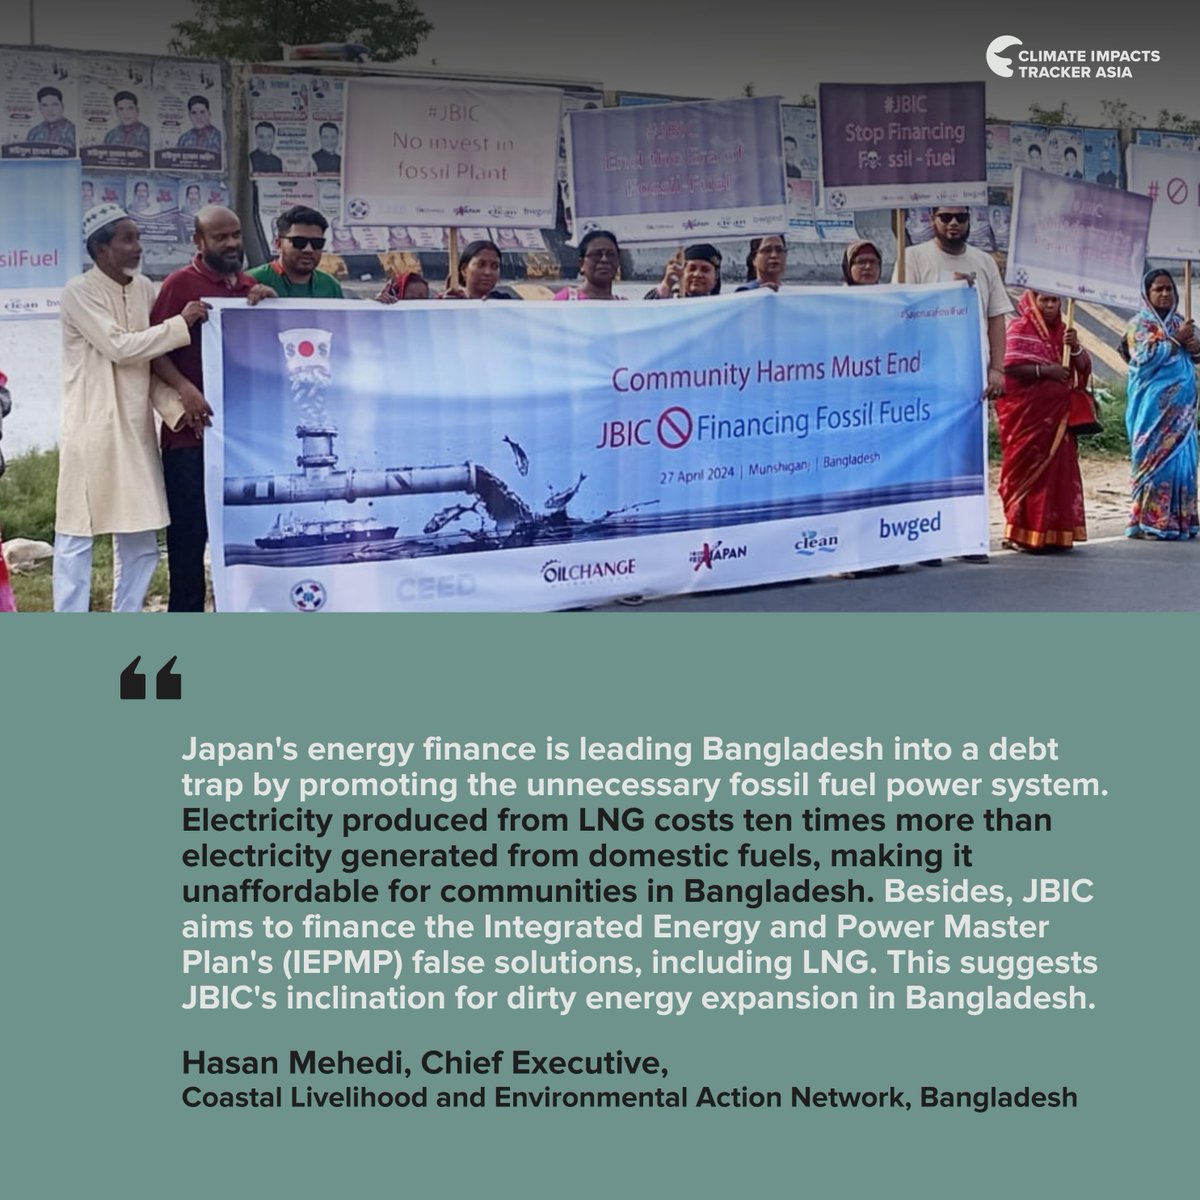 The Meghnaghat LNG Power Plant in #Bangladesh was constructed with financing from #JICA and #JIBC, affecting communities and the economy. PC @CLEANBD @CEED @PriceofOil @FossilFreeJapan  #SayonaraFossilFuels sign the petition bit.ly/49RM7uM